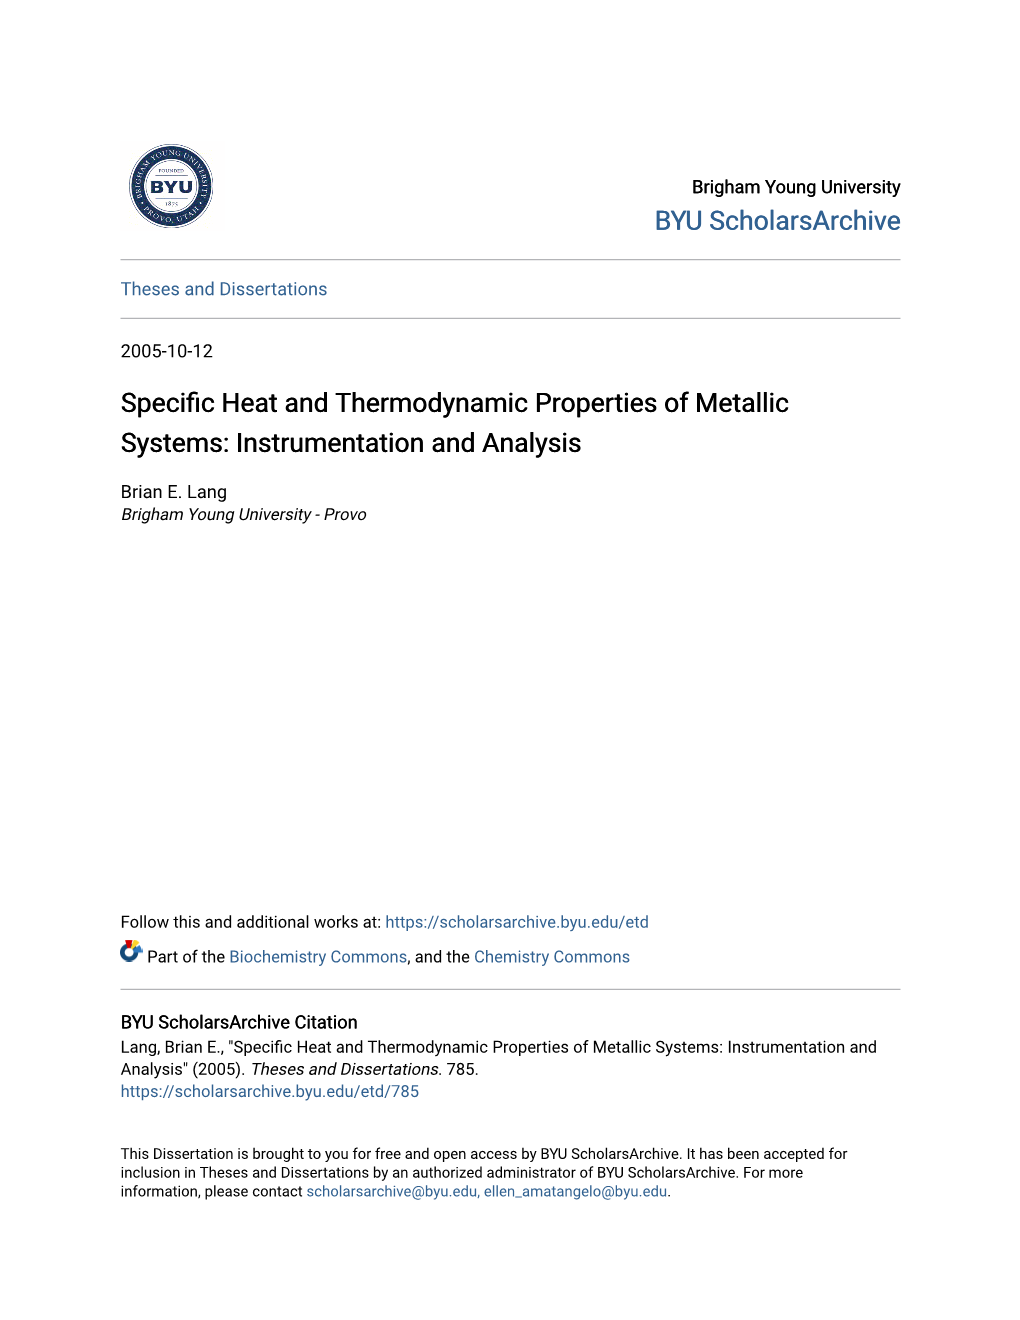 Specific Heat and Thermodynamic Properties of Metallic Systems: Instrumentation and Analysis